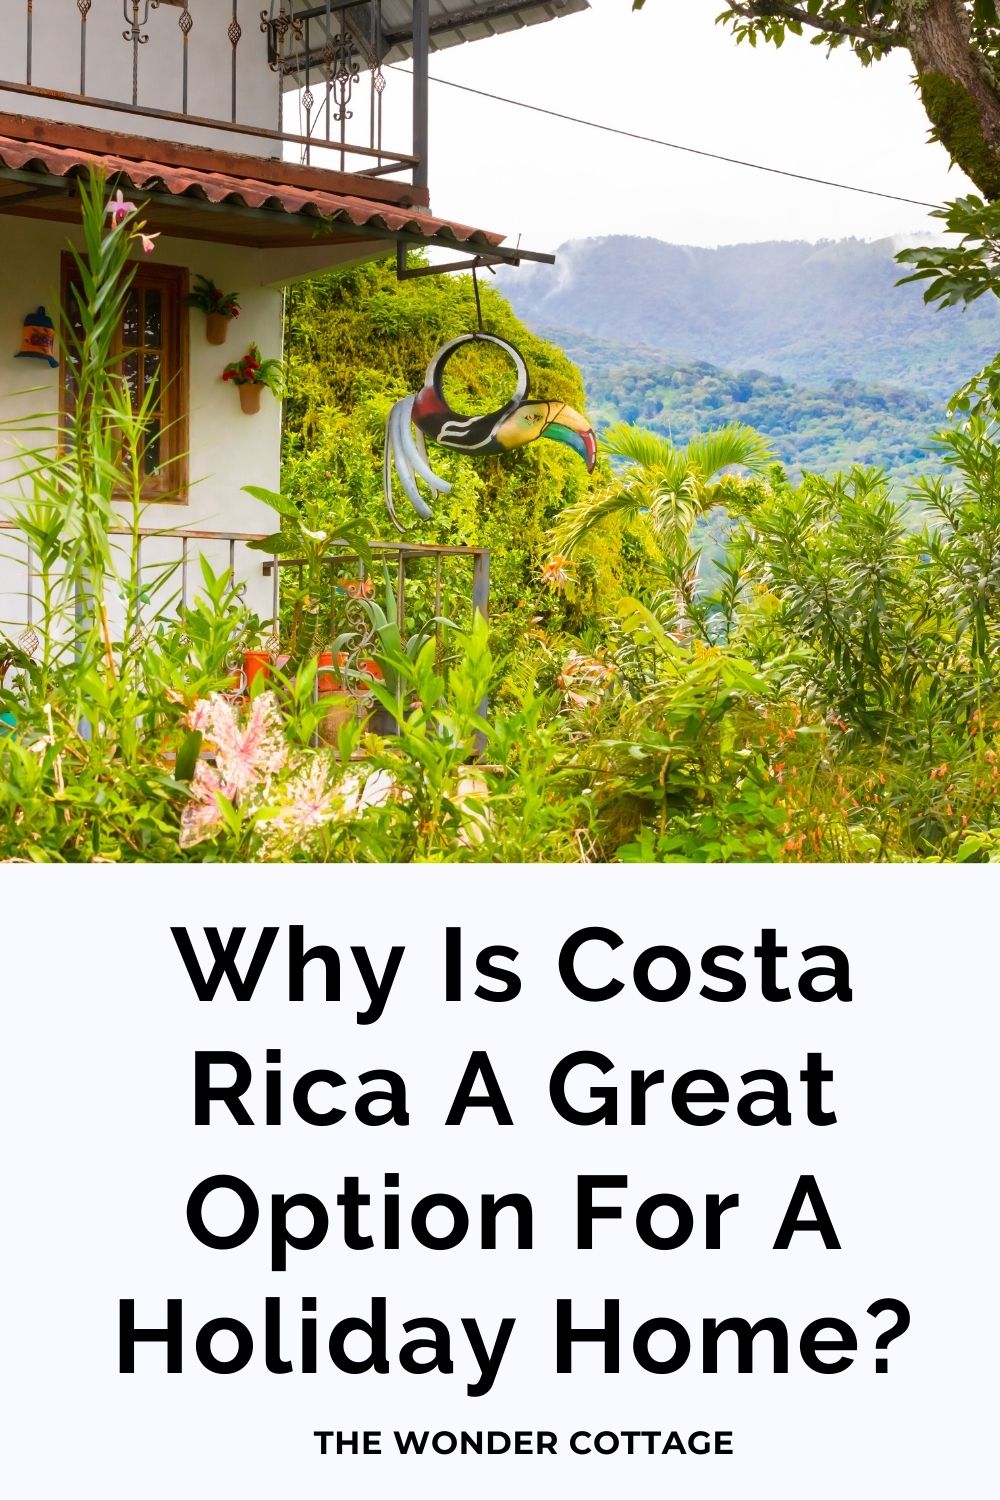 Why is Costa Rica a great option for a holiday home